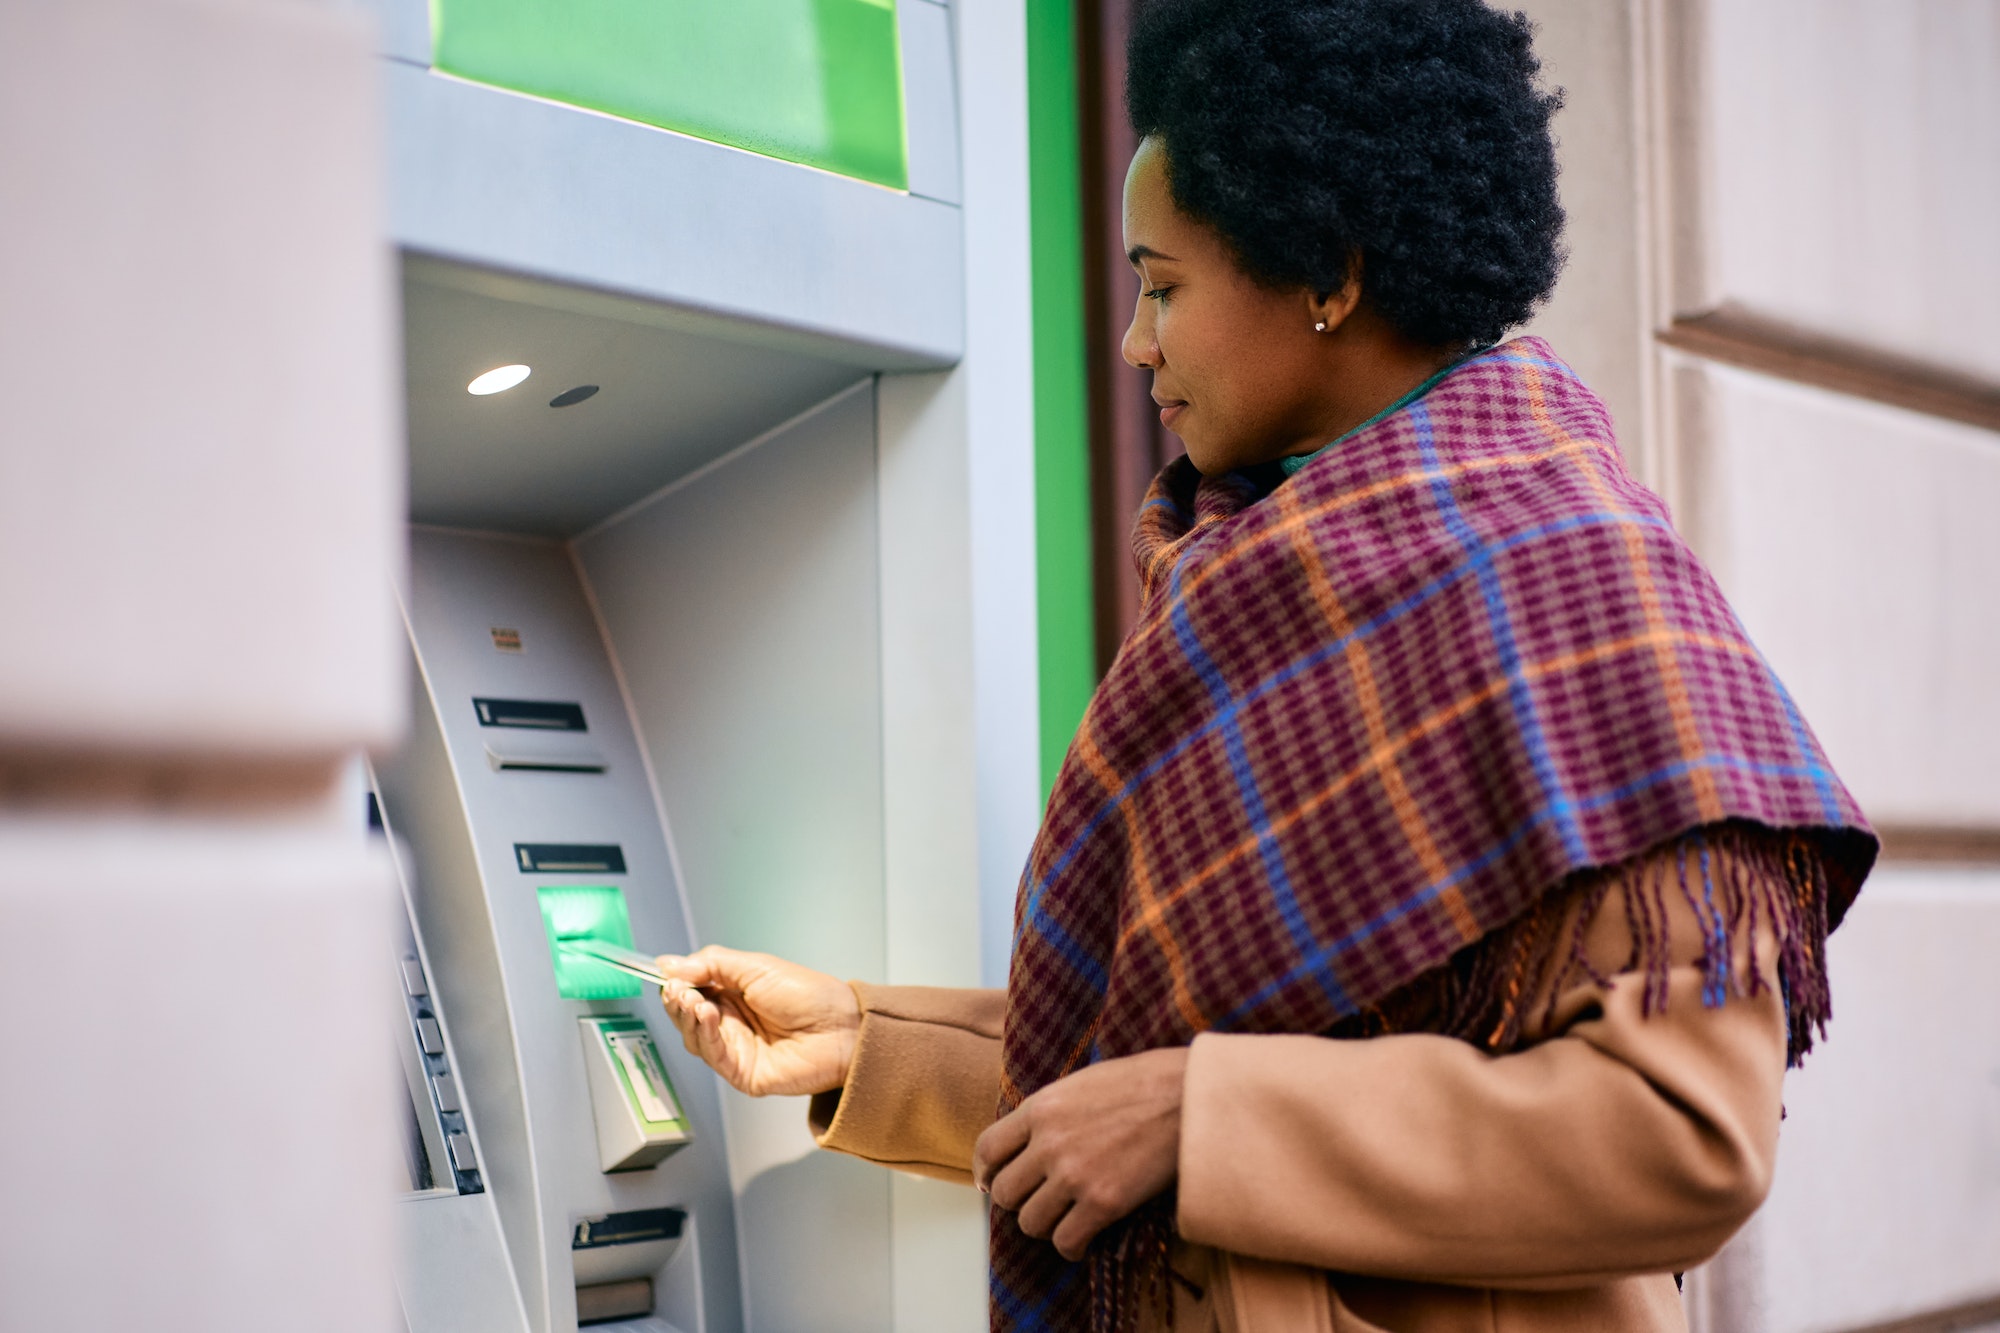 African American woman withdrawing money from ATM machine in the city.